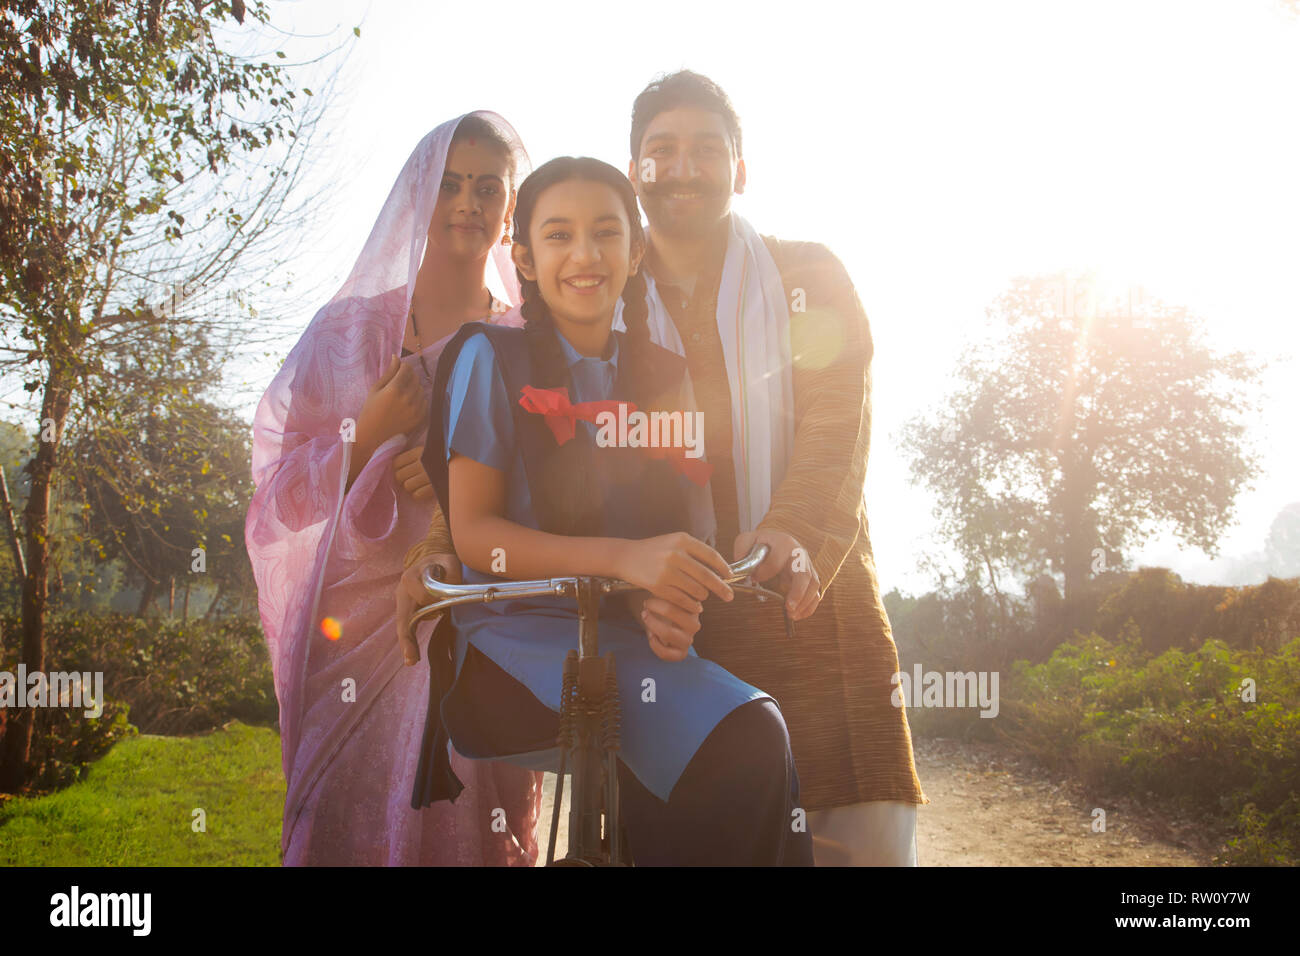 Low angle view of a happy rural family consisting of man, woman and a school going girl standing on pathway in a village. Stock Photo